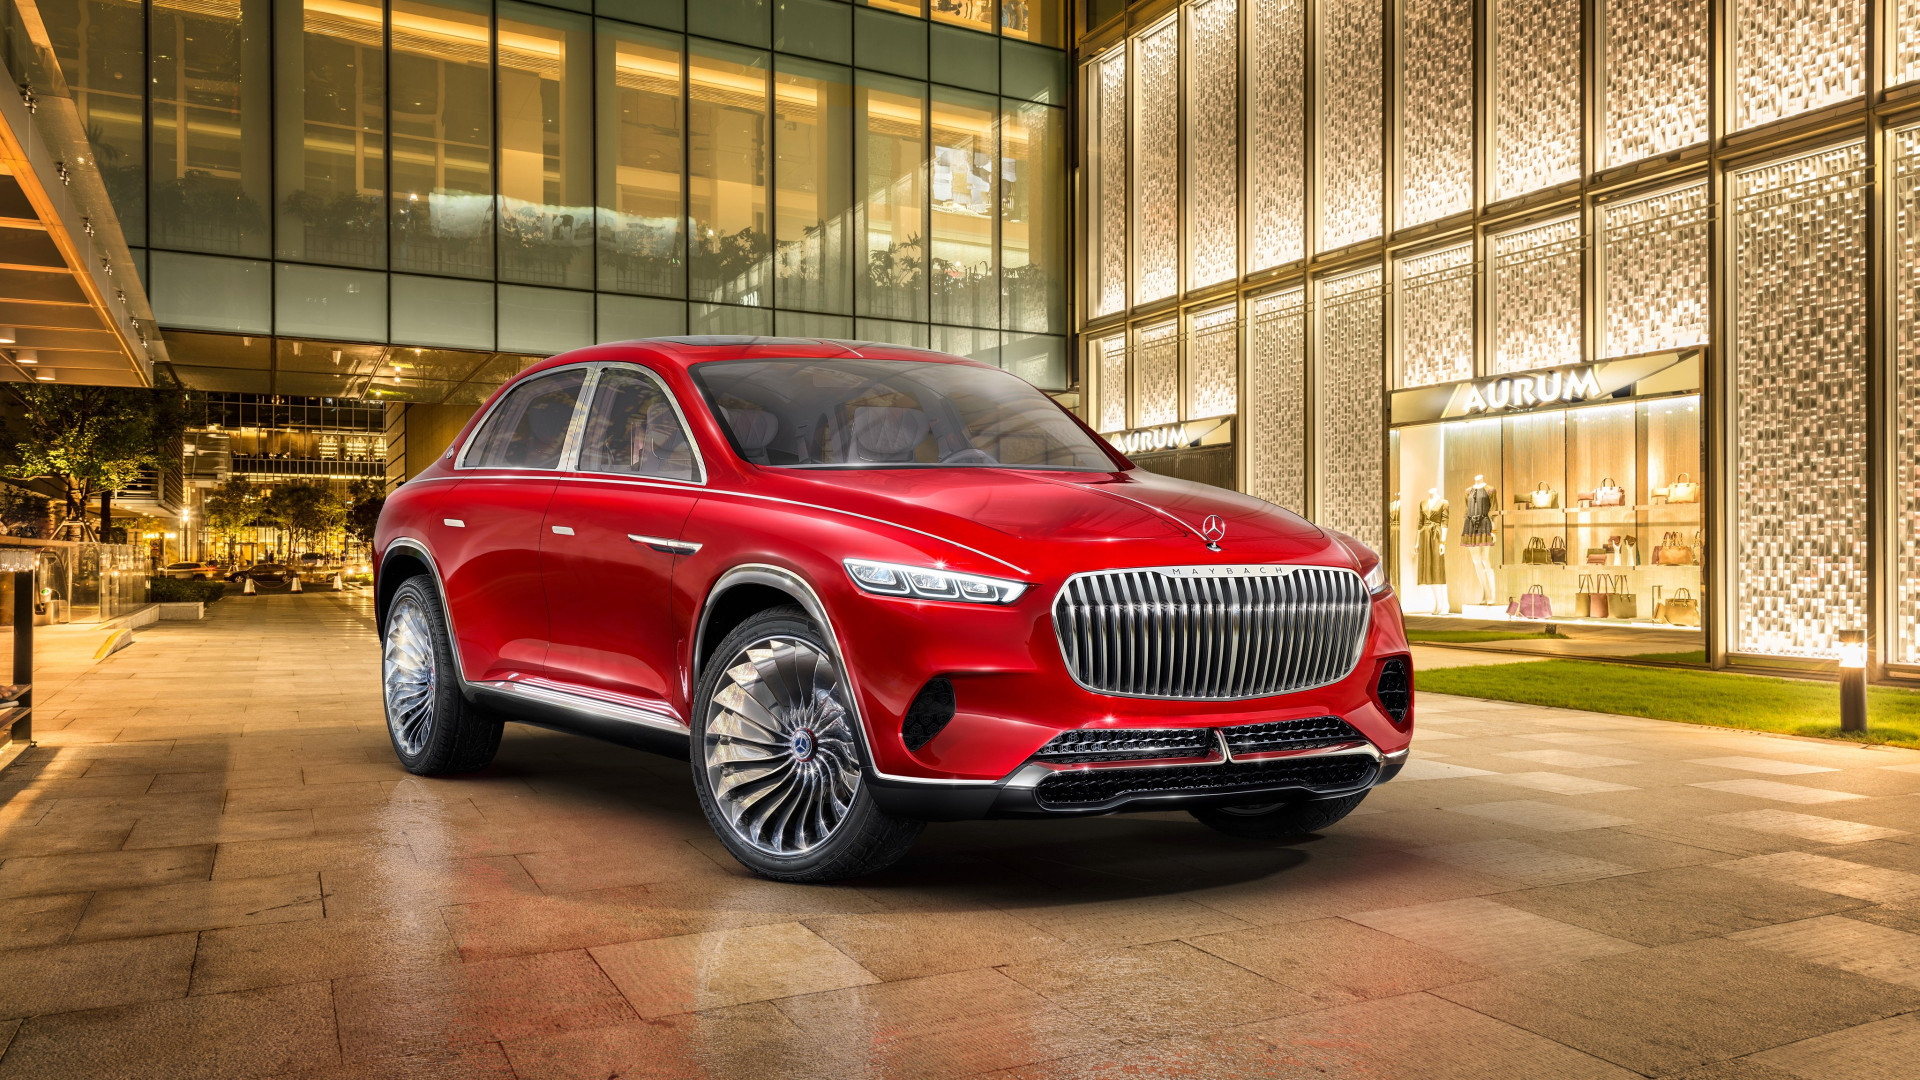 The Vision Mercedes Maybach Ultimate Luxury wallpaper 1920x1080